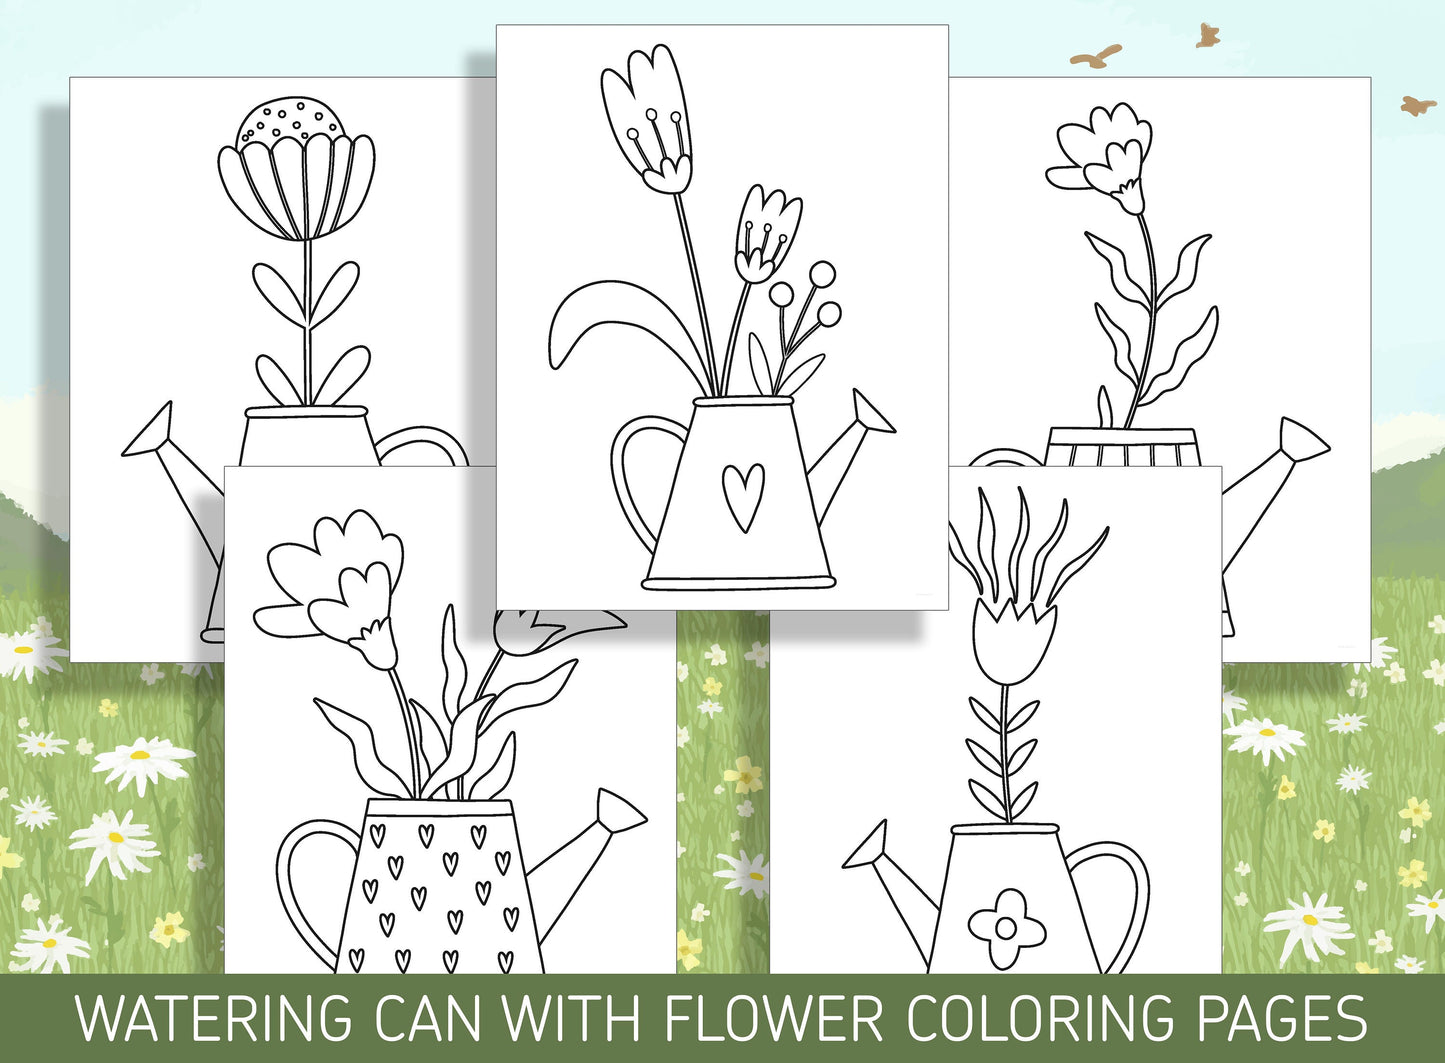 15 Beautiful Watering Can with Flower Coloring Pages for a Relaxing Activity, PDF File, Instant Download